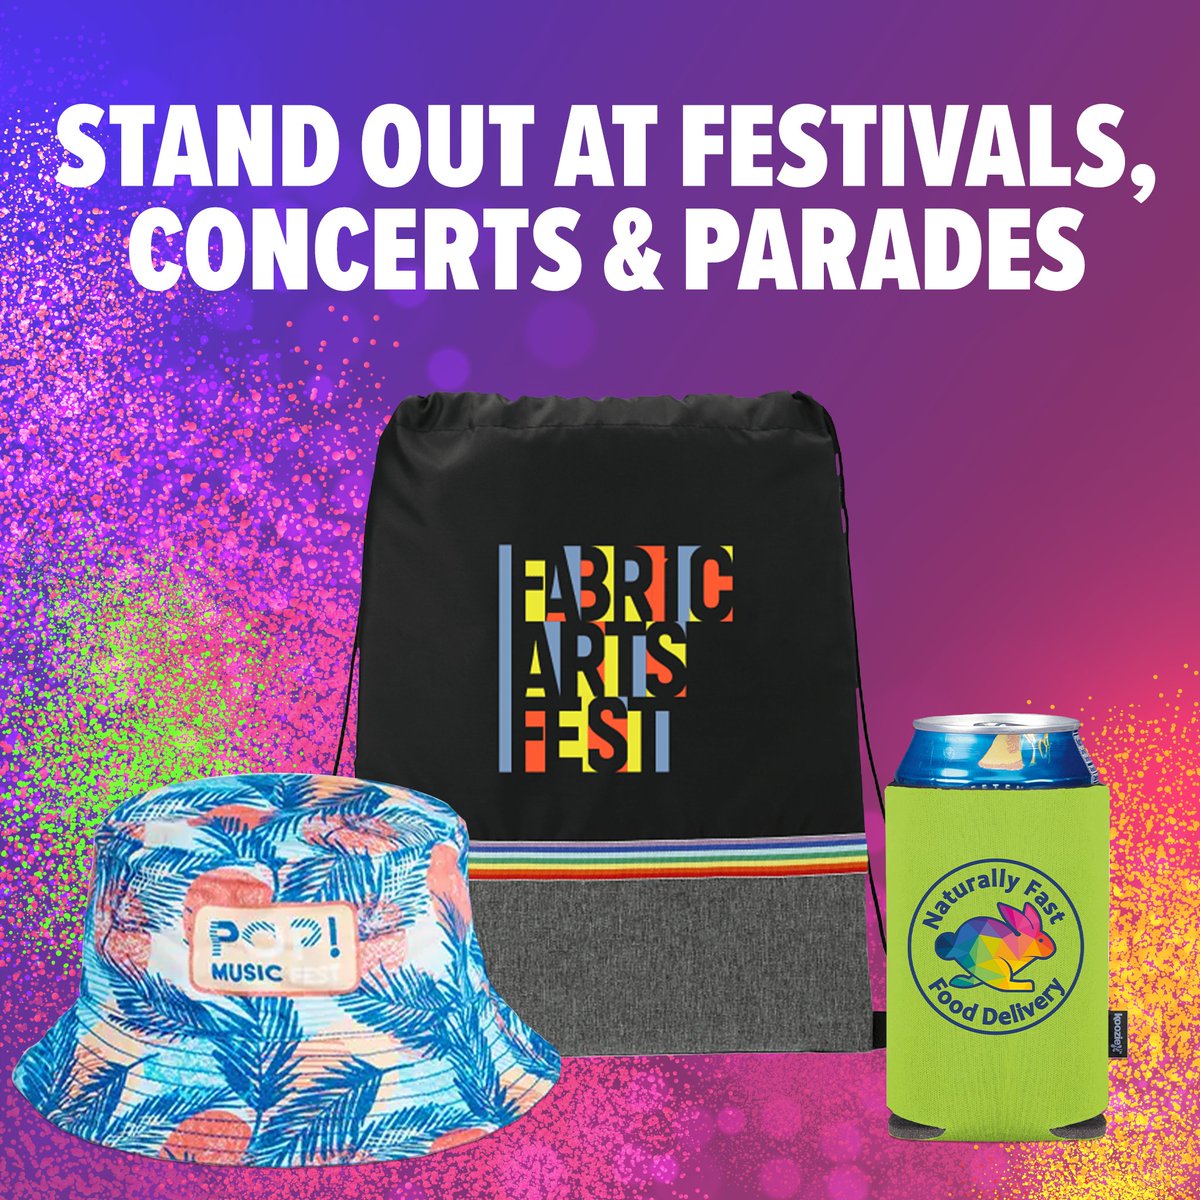 🎶🎉 Gear up for festivals, concerts and parades with trending and new swag that stands out! bit.ly/3JmzfSu

#paradegiveaways #festivalgiveways #outdoorevents